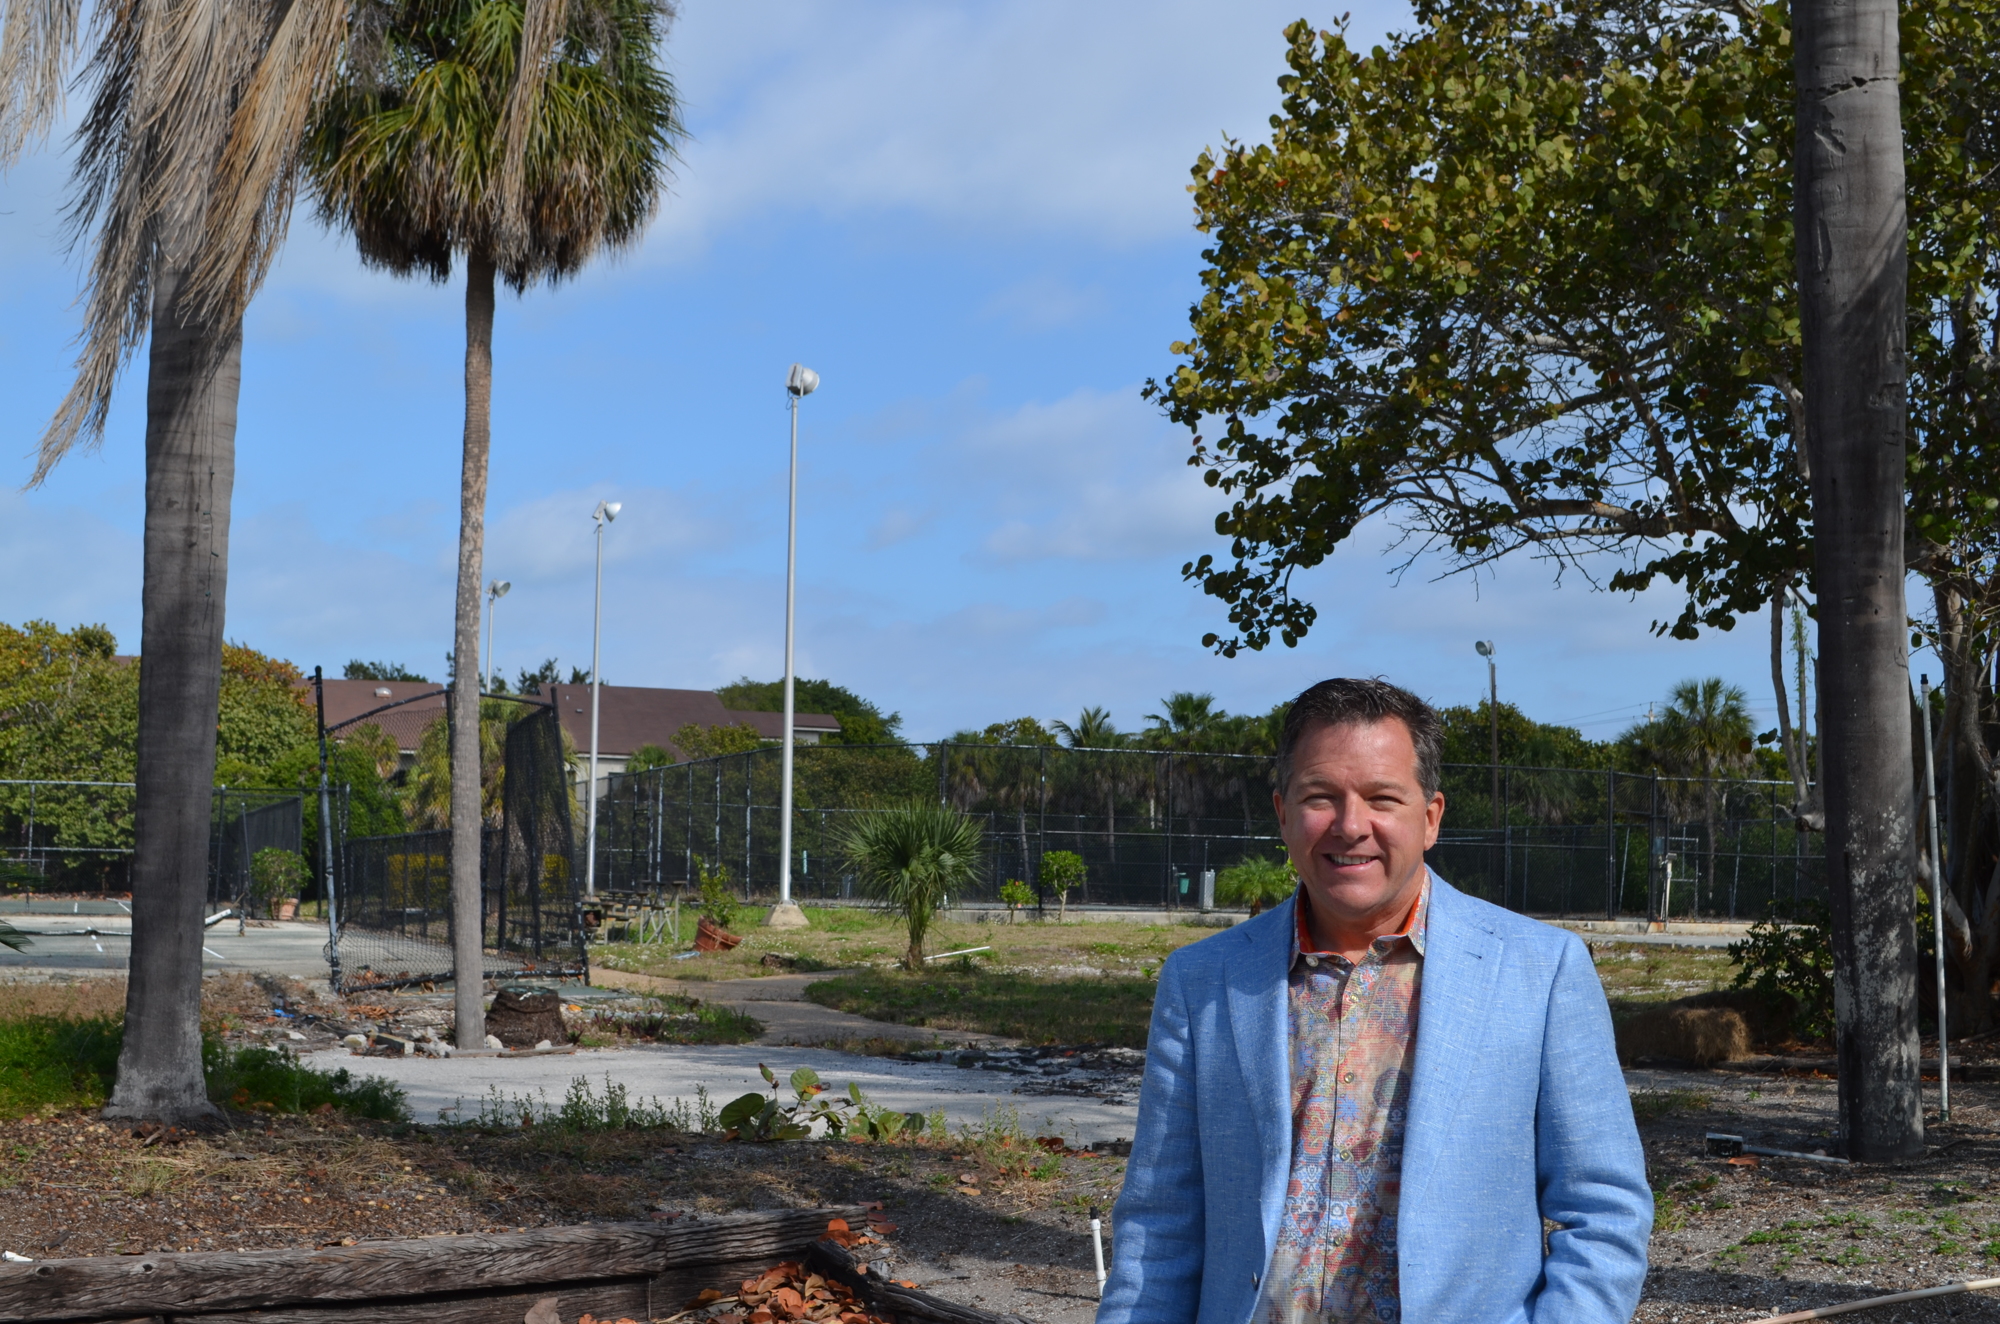 Chuck Whittall spoke with the Longboat Observer at the former Colony property on Wednesday morning. 